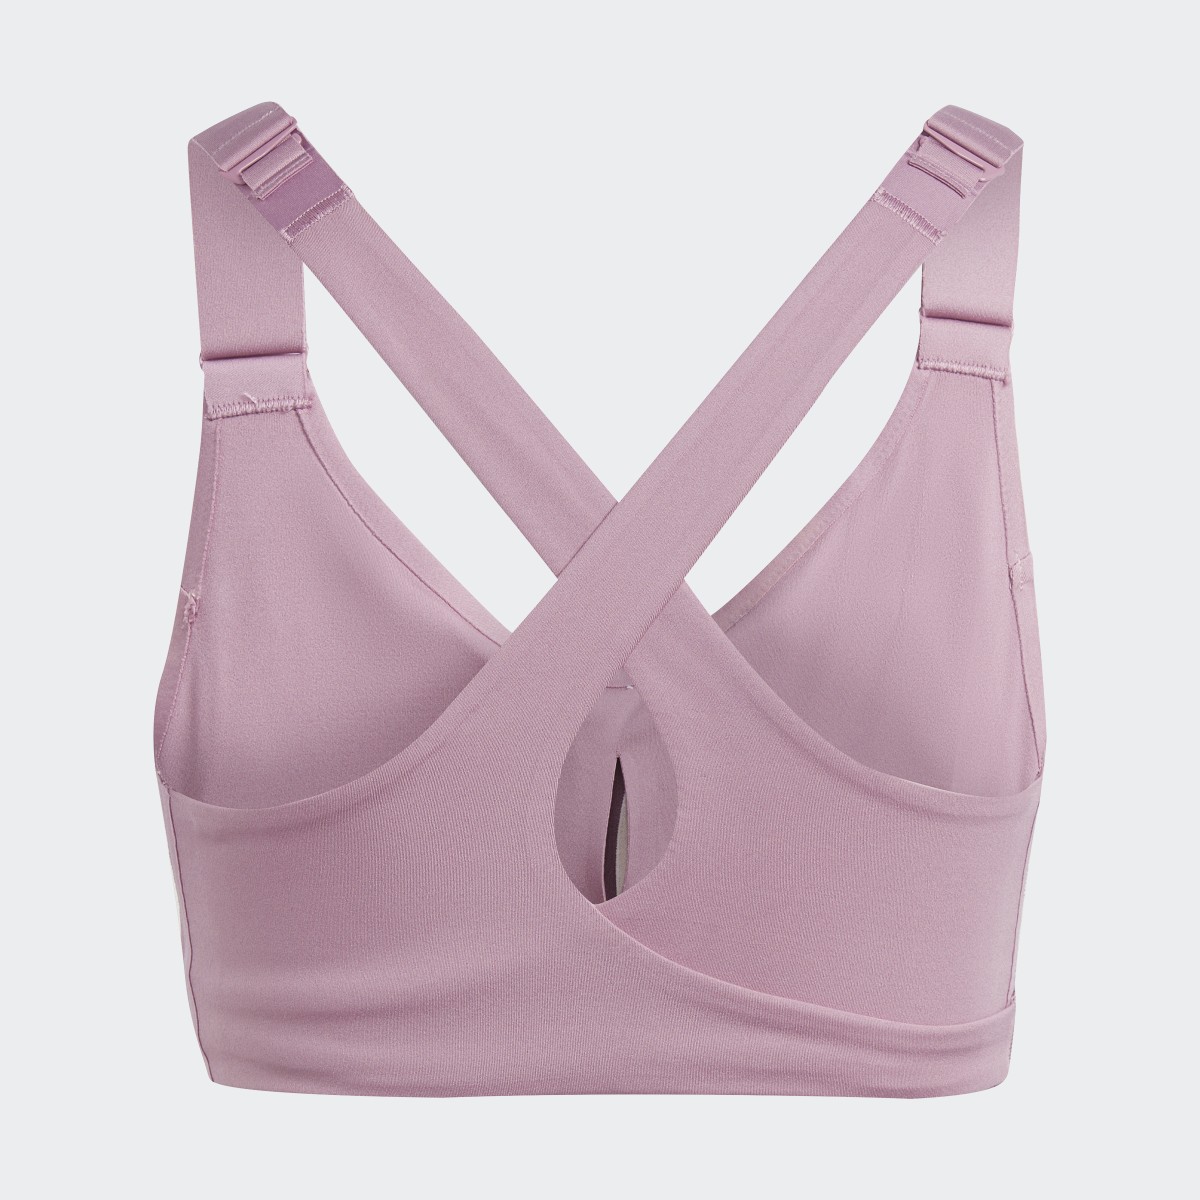 Adidas Collective Power Fastimpact Luxe High-Support Bra. 6